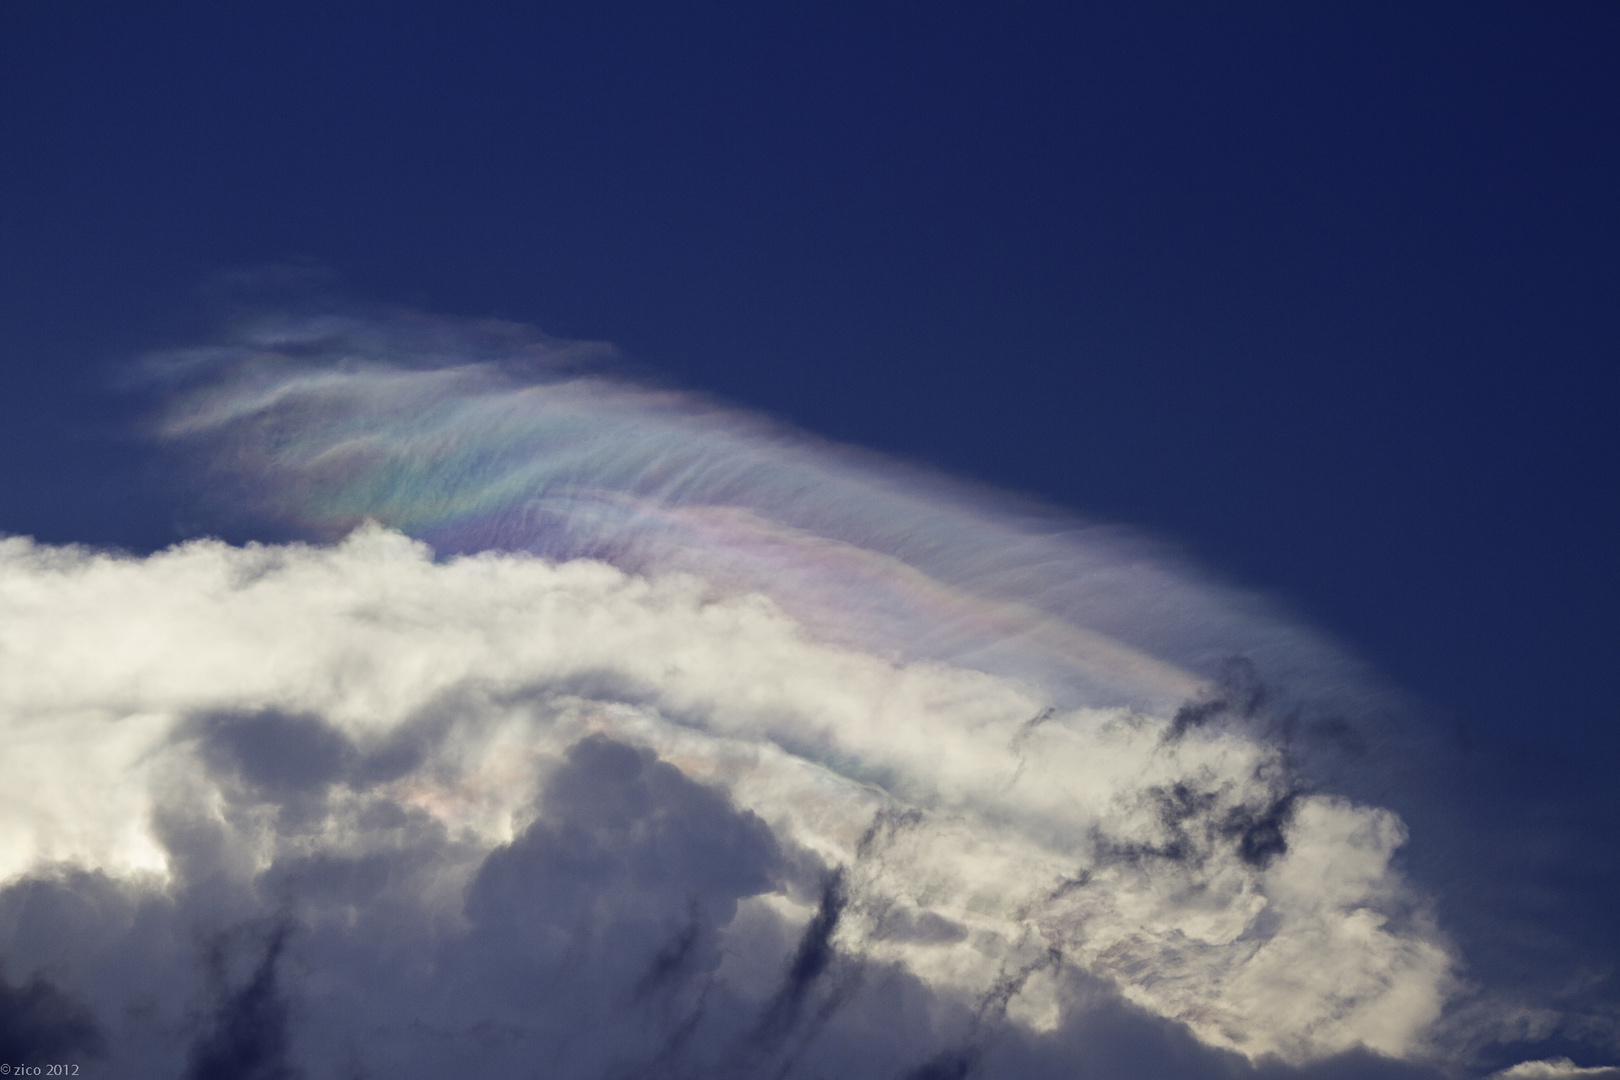 Rainbow in the Cloud